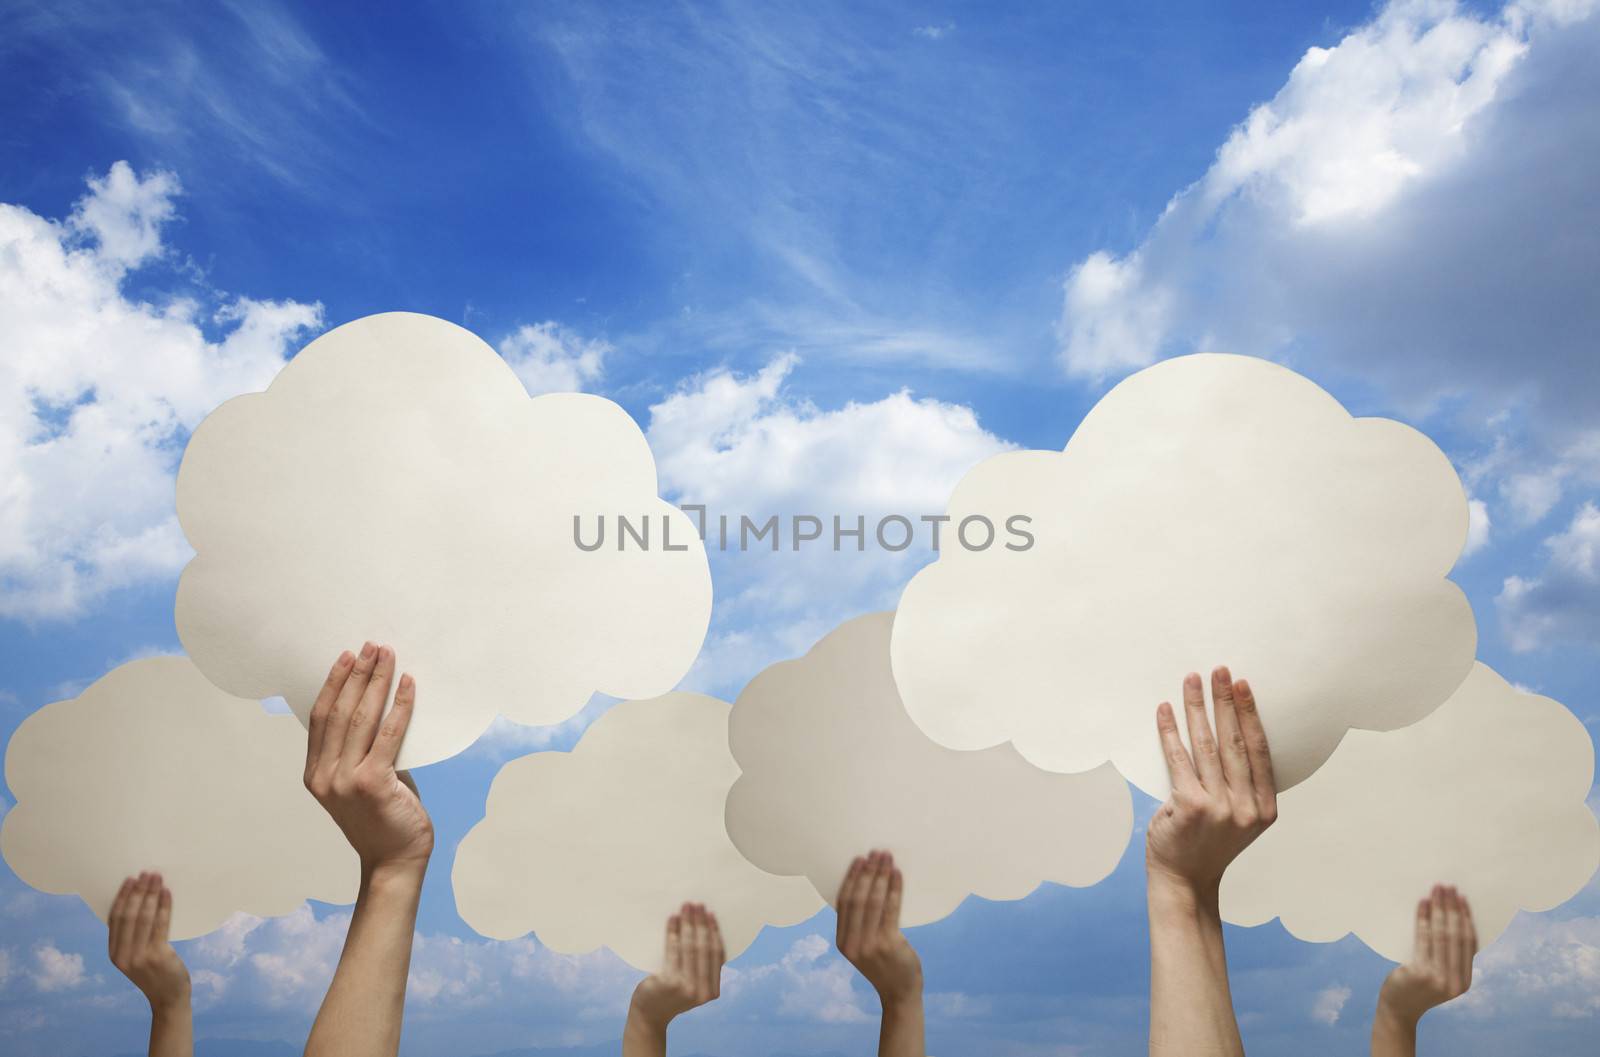 Multiple hands holding cut out paper clouds against a blue sky with clouds